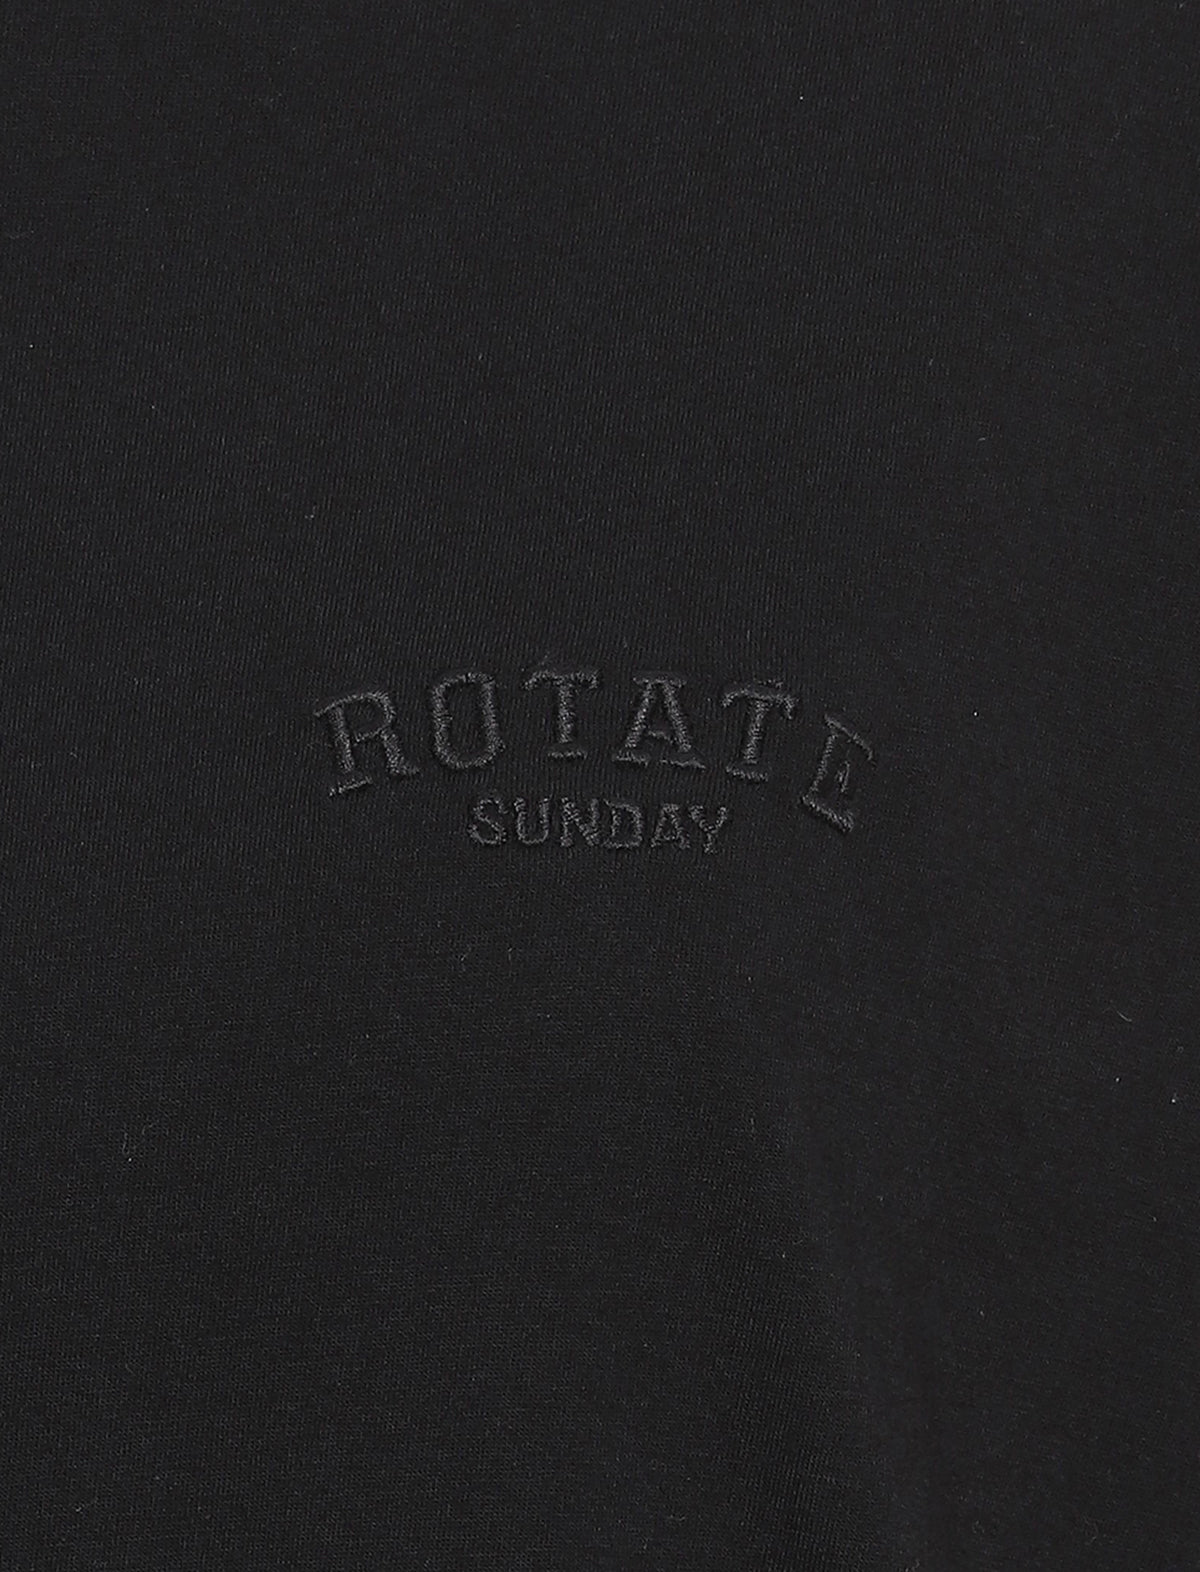 ROTATE Sunday 3 Aster T-Shirt in Black